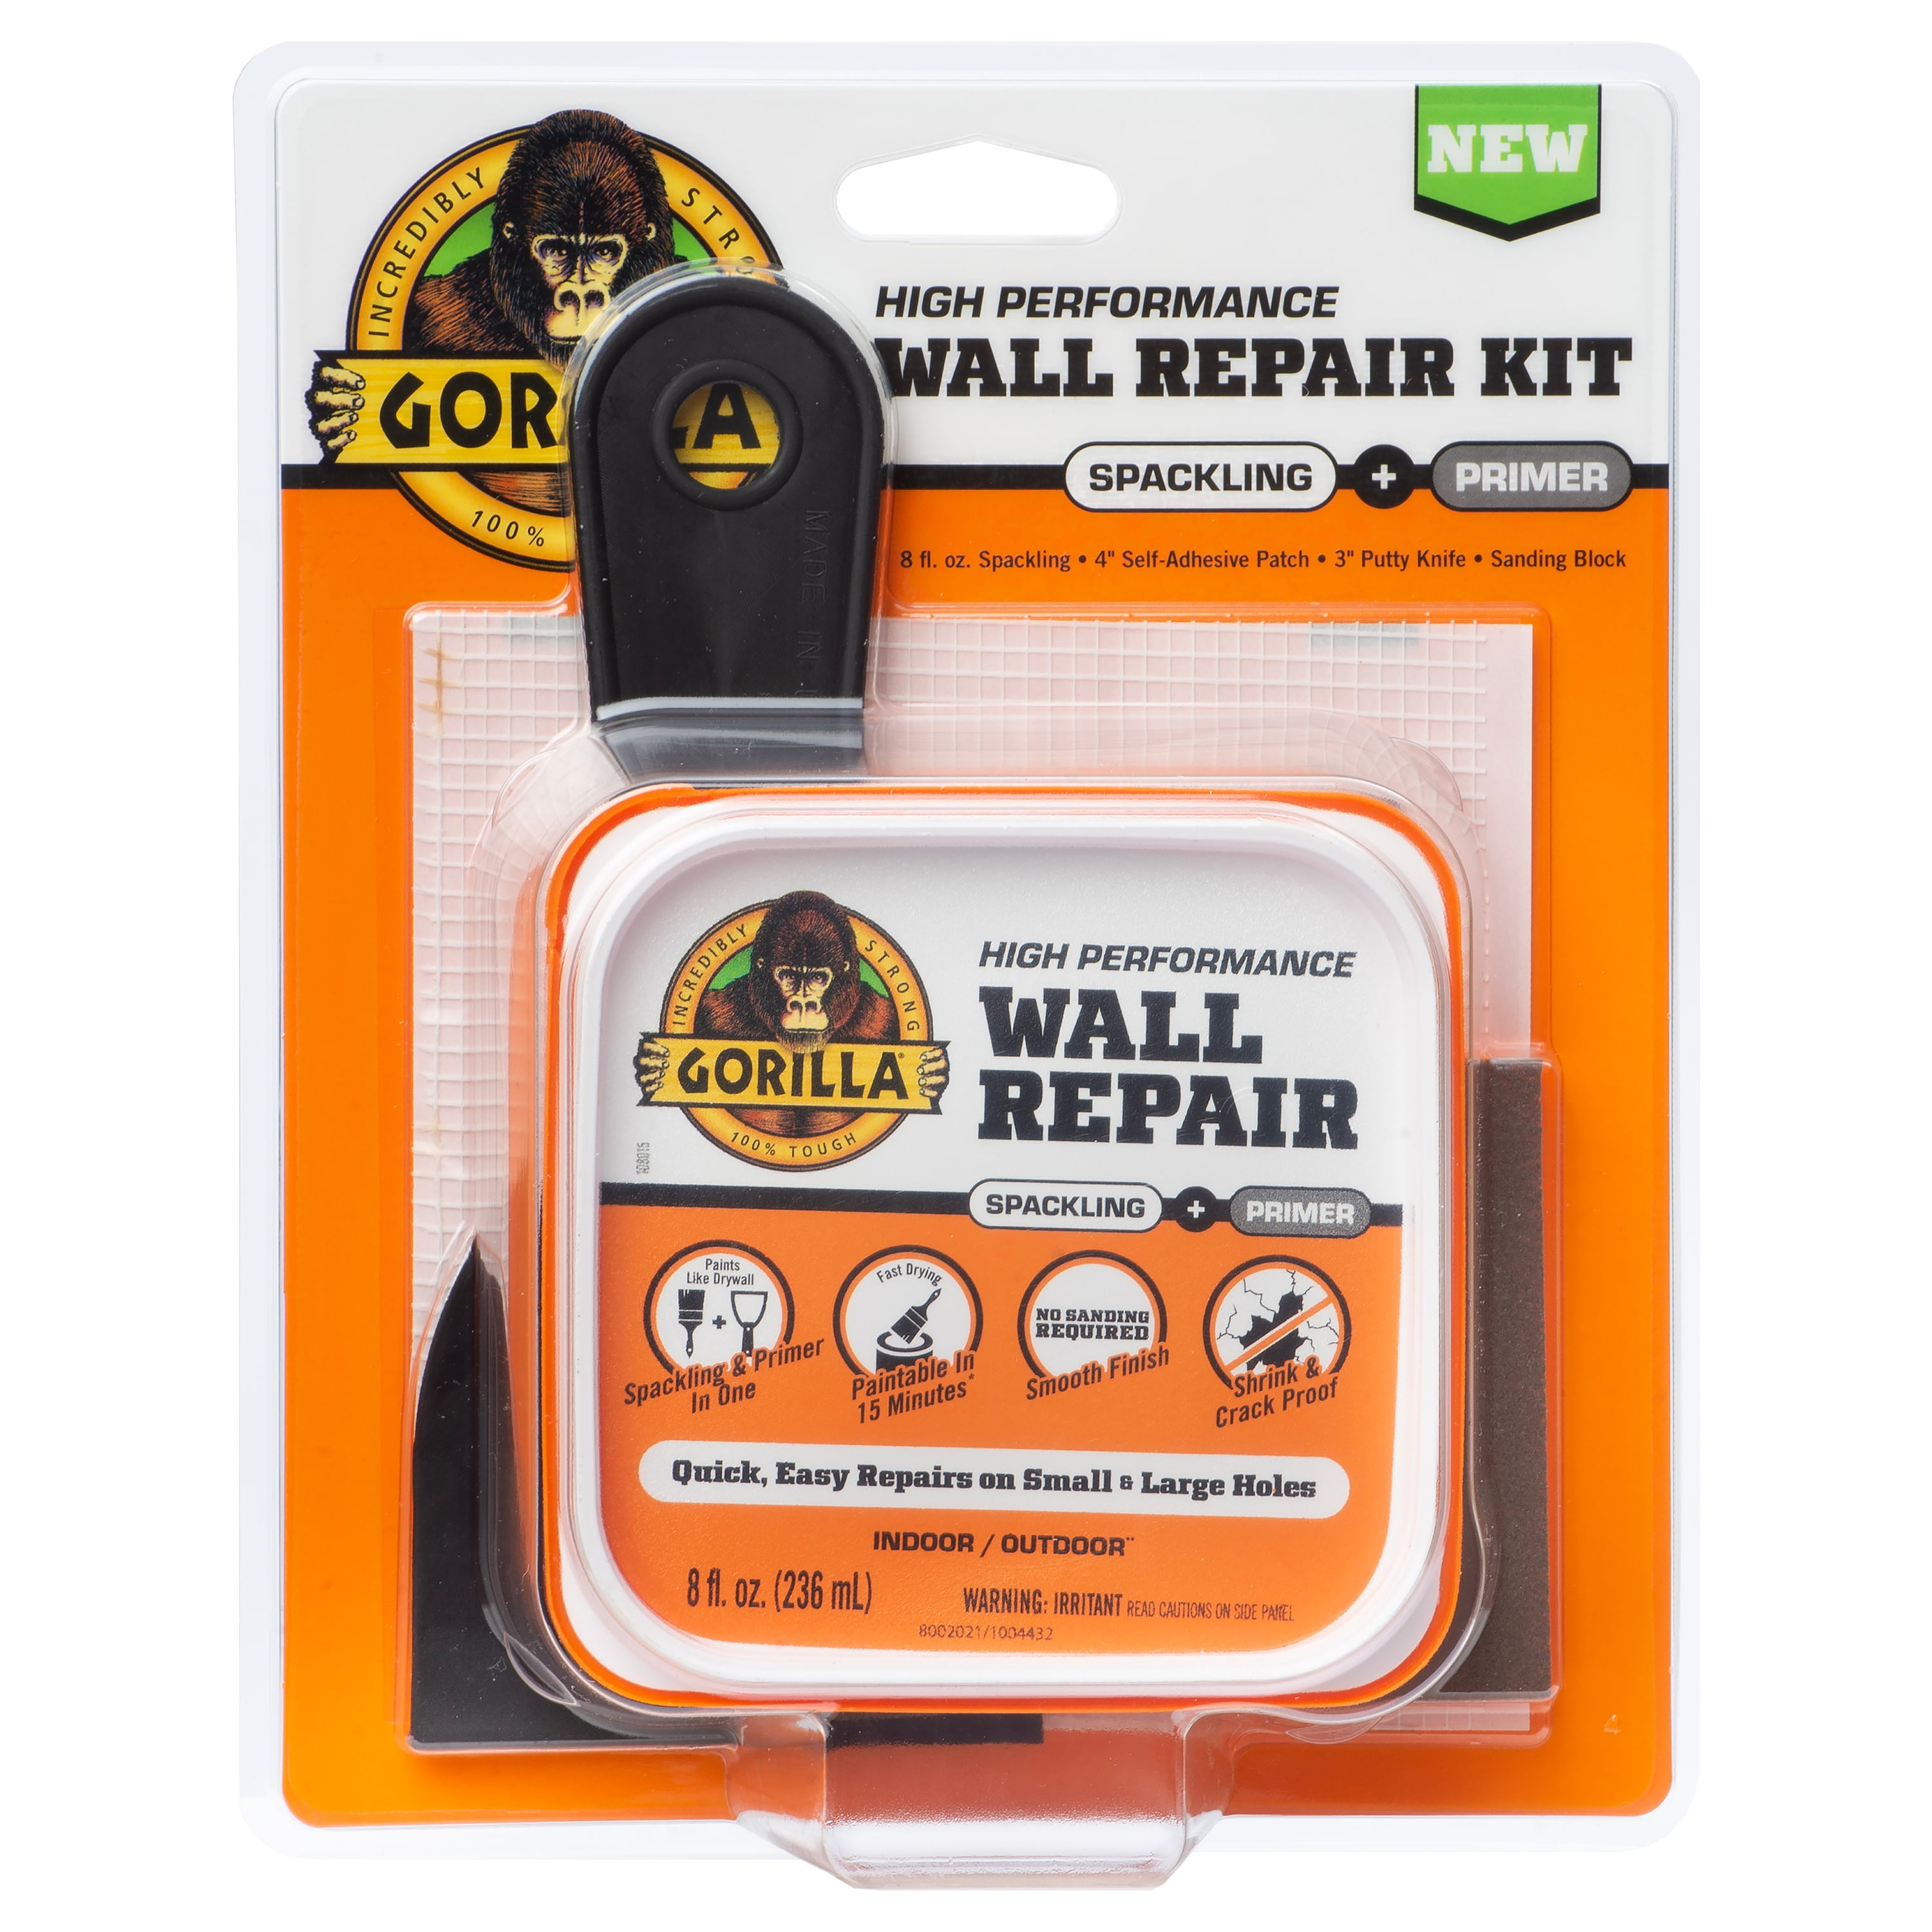 Gorilla Glue Wall Repair Kit. 4oz Spackling & Patch, 3" Putty Knife and 220 Grit Sanding Block